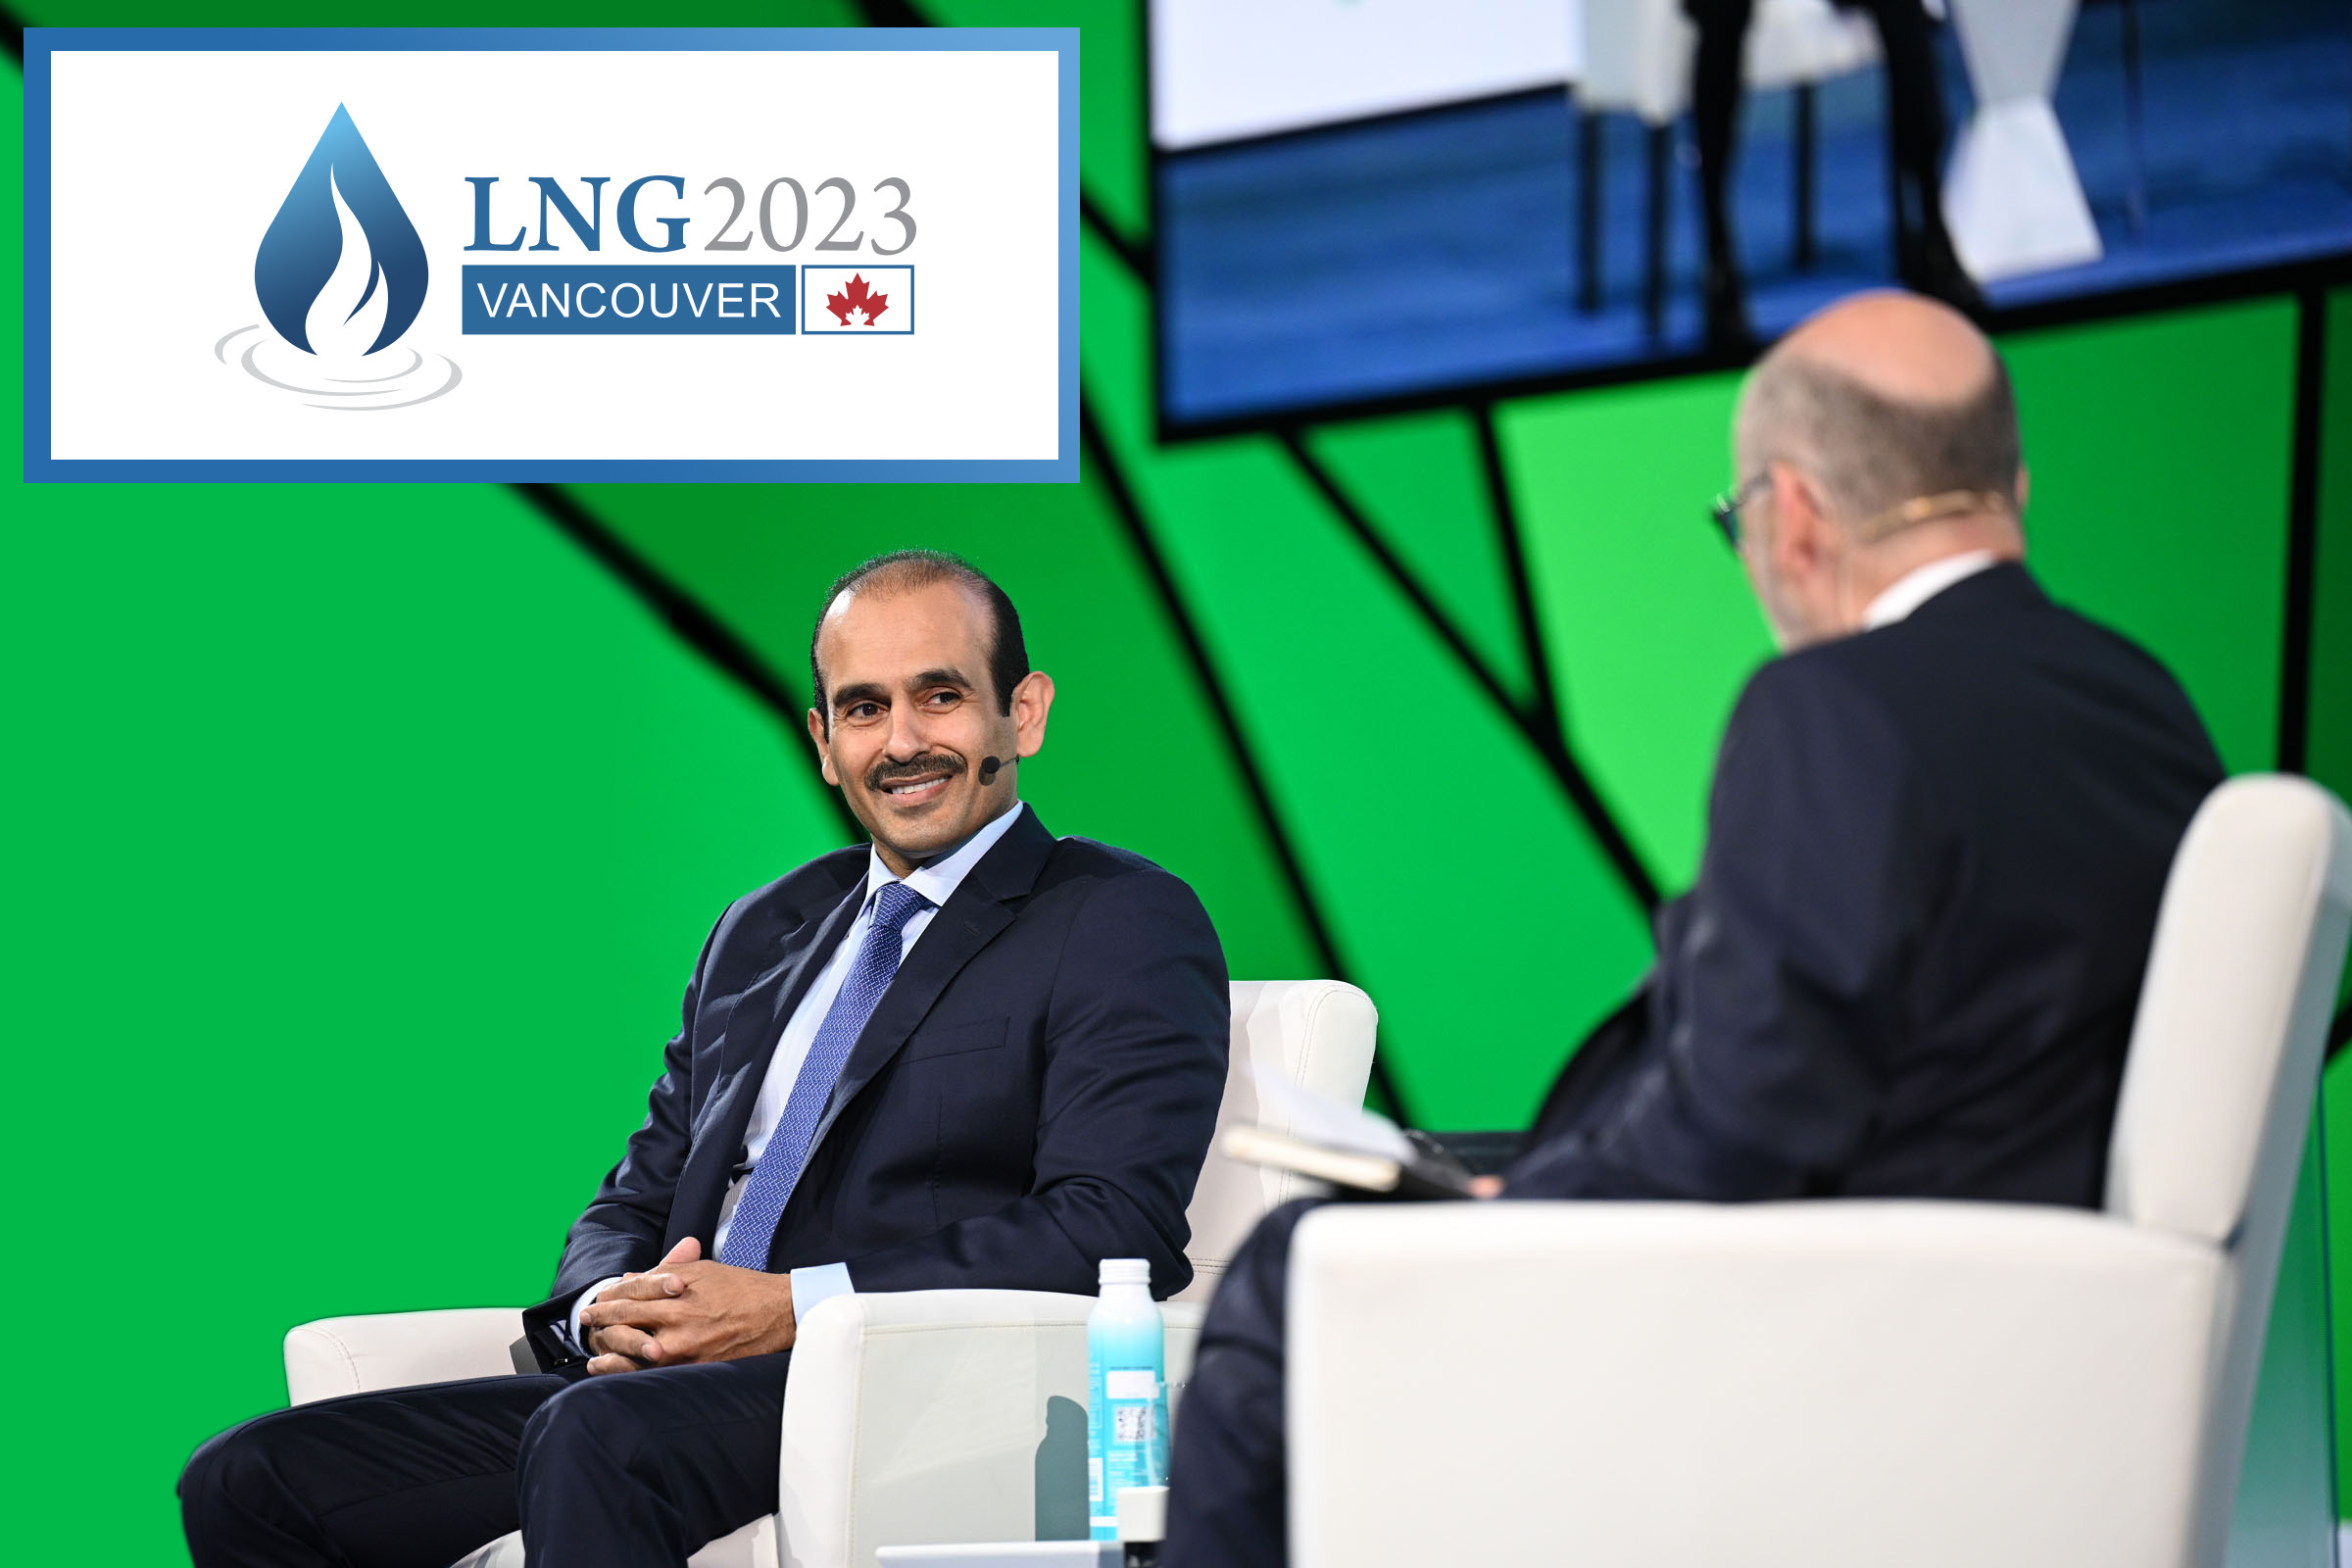 Www Schoolsexvideo Com - Saad Sherida Al-Kaabi: â€œ40% of all the new LNG that will come to the market  by 2029 is going to be from QatarEnergyâ€ - All of the Latest Oil and Gas  News-Find